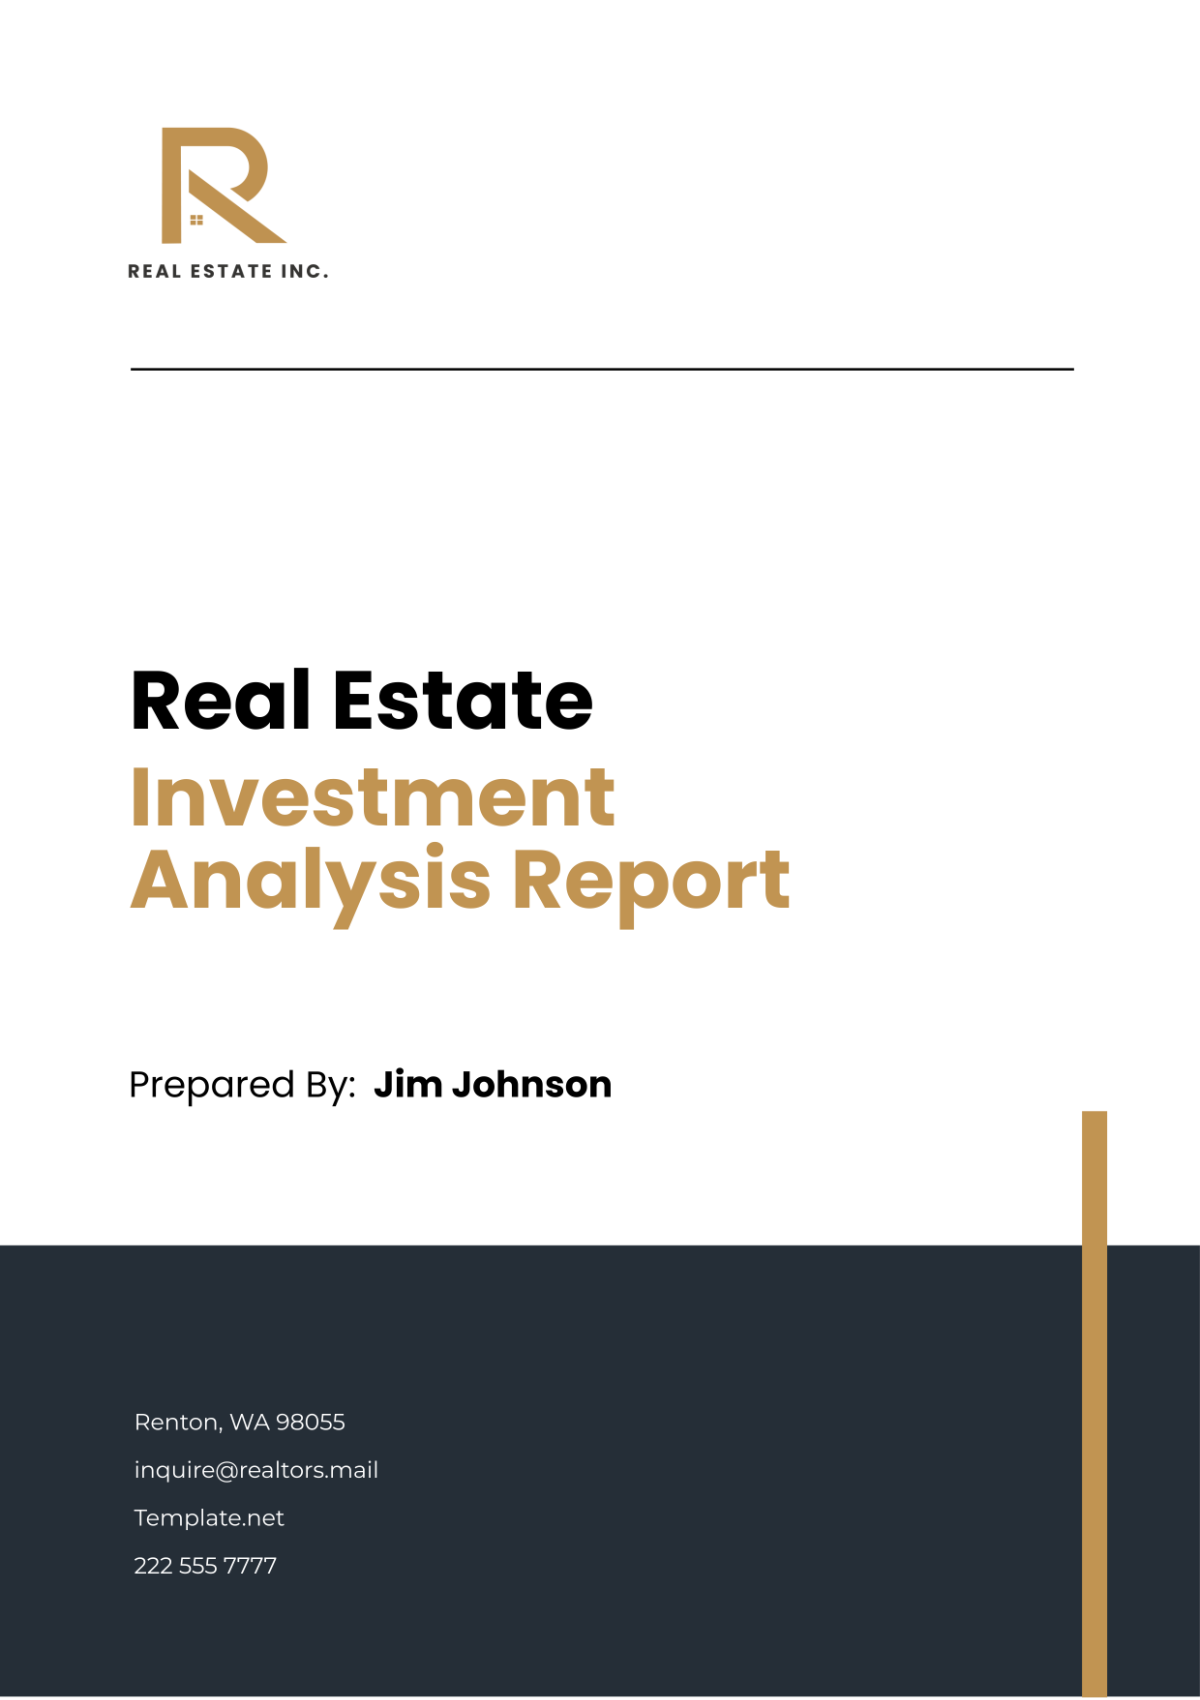 Real Estate Investment Analysis Report Template